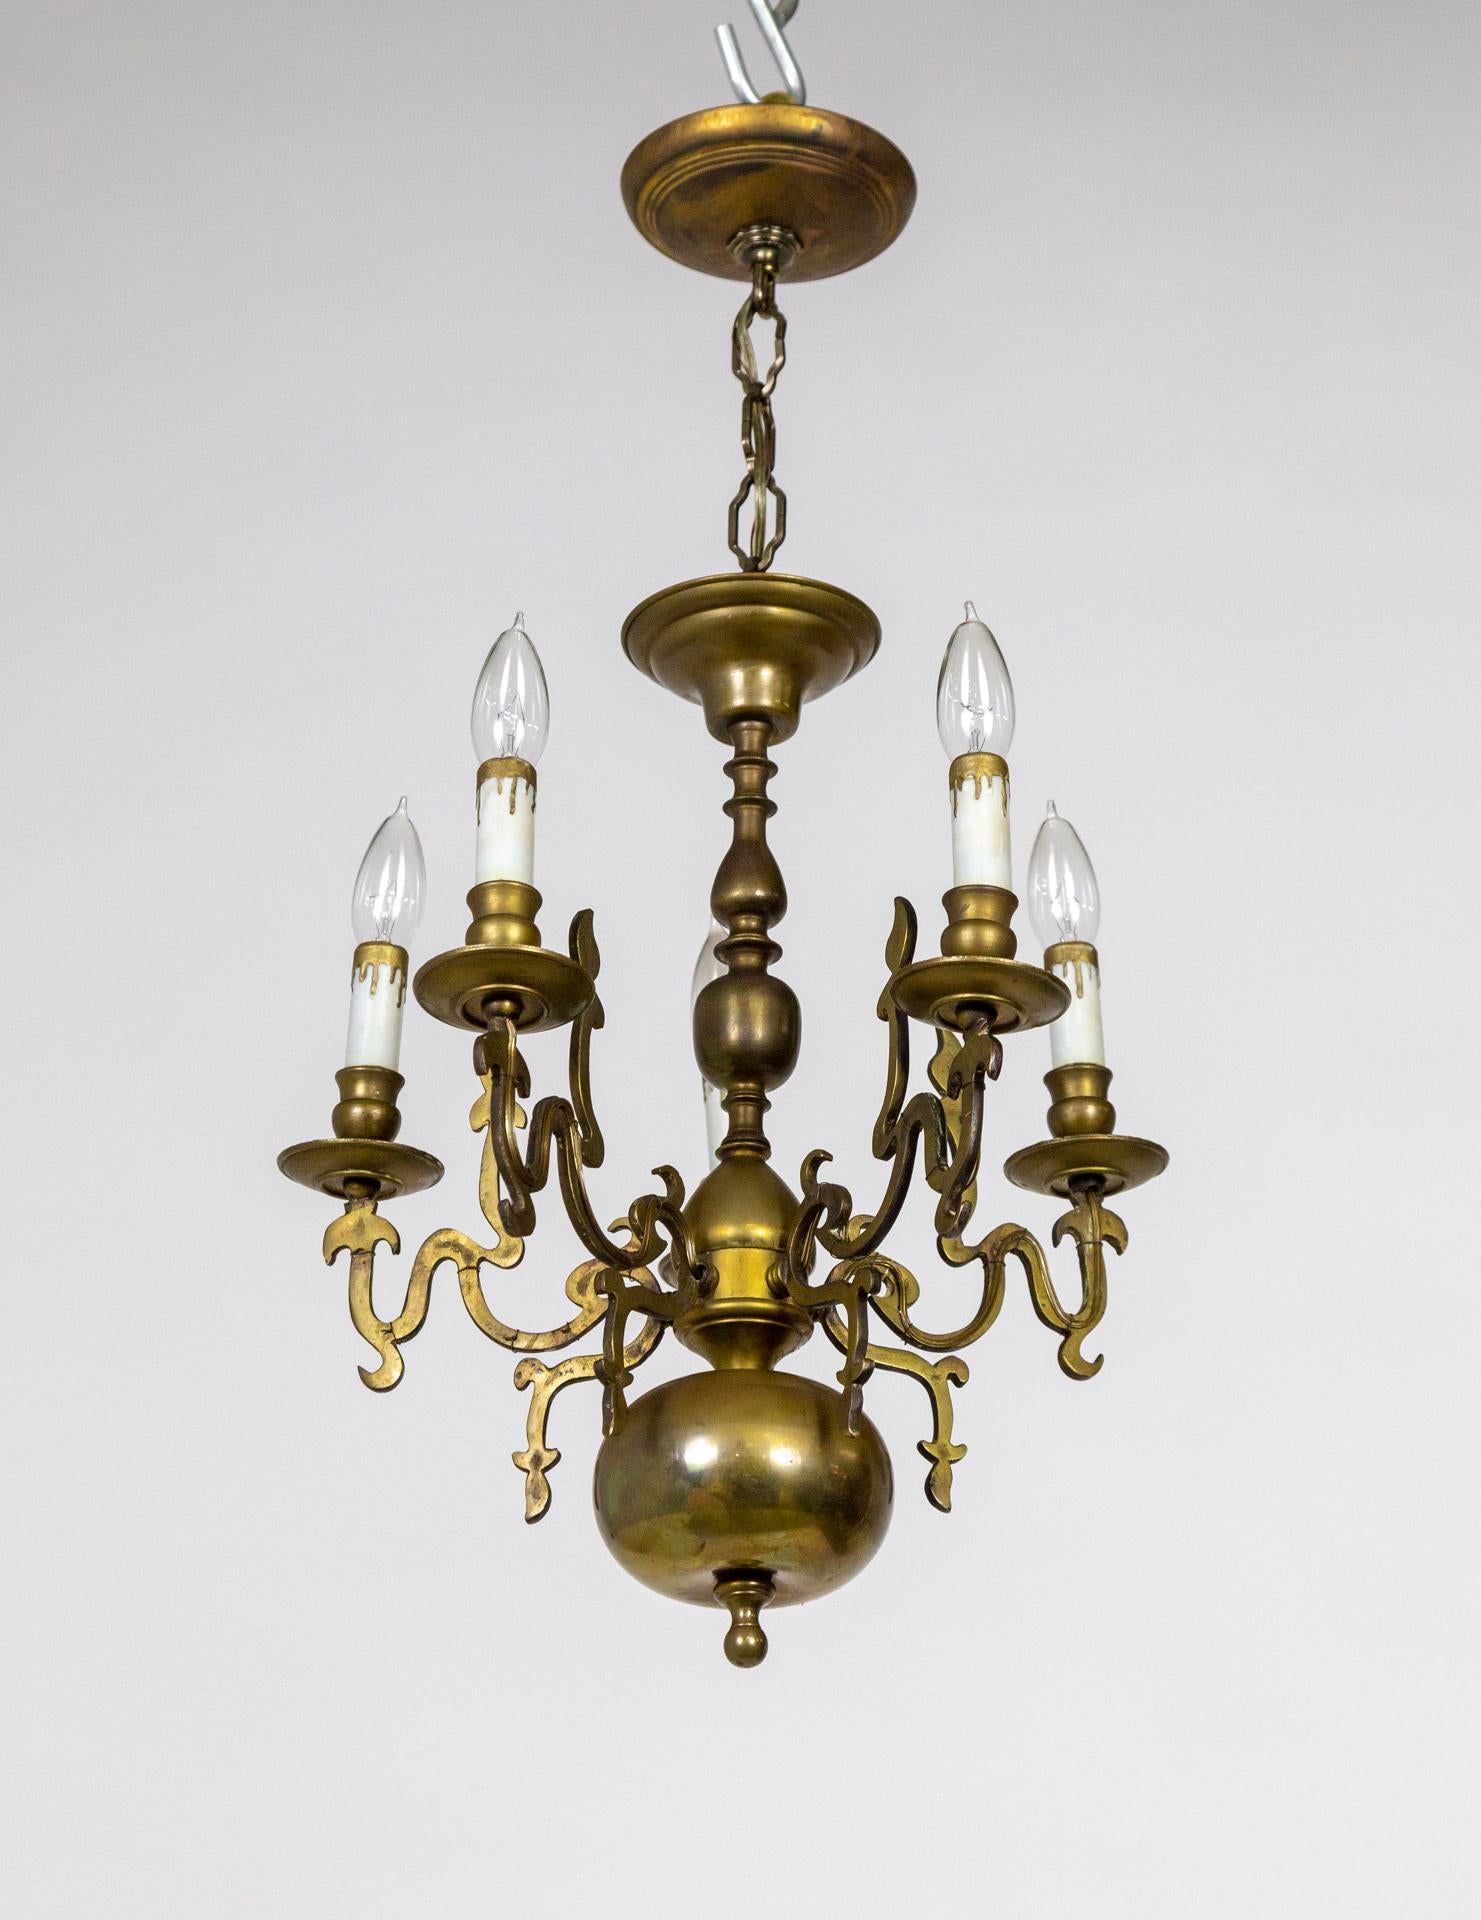 A 19th century Dutch chandelier with Renaissance Revival flame accents. A rich patina on a solid brass, turned-style form with 5 wavy, candlestick arms. Relatively petite size, 17” diameter x 18” height, 28” overall height including chain and